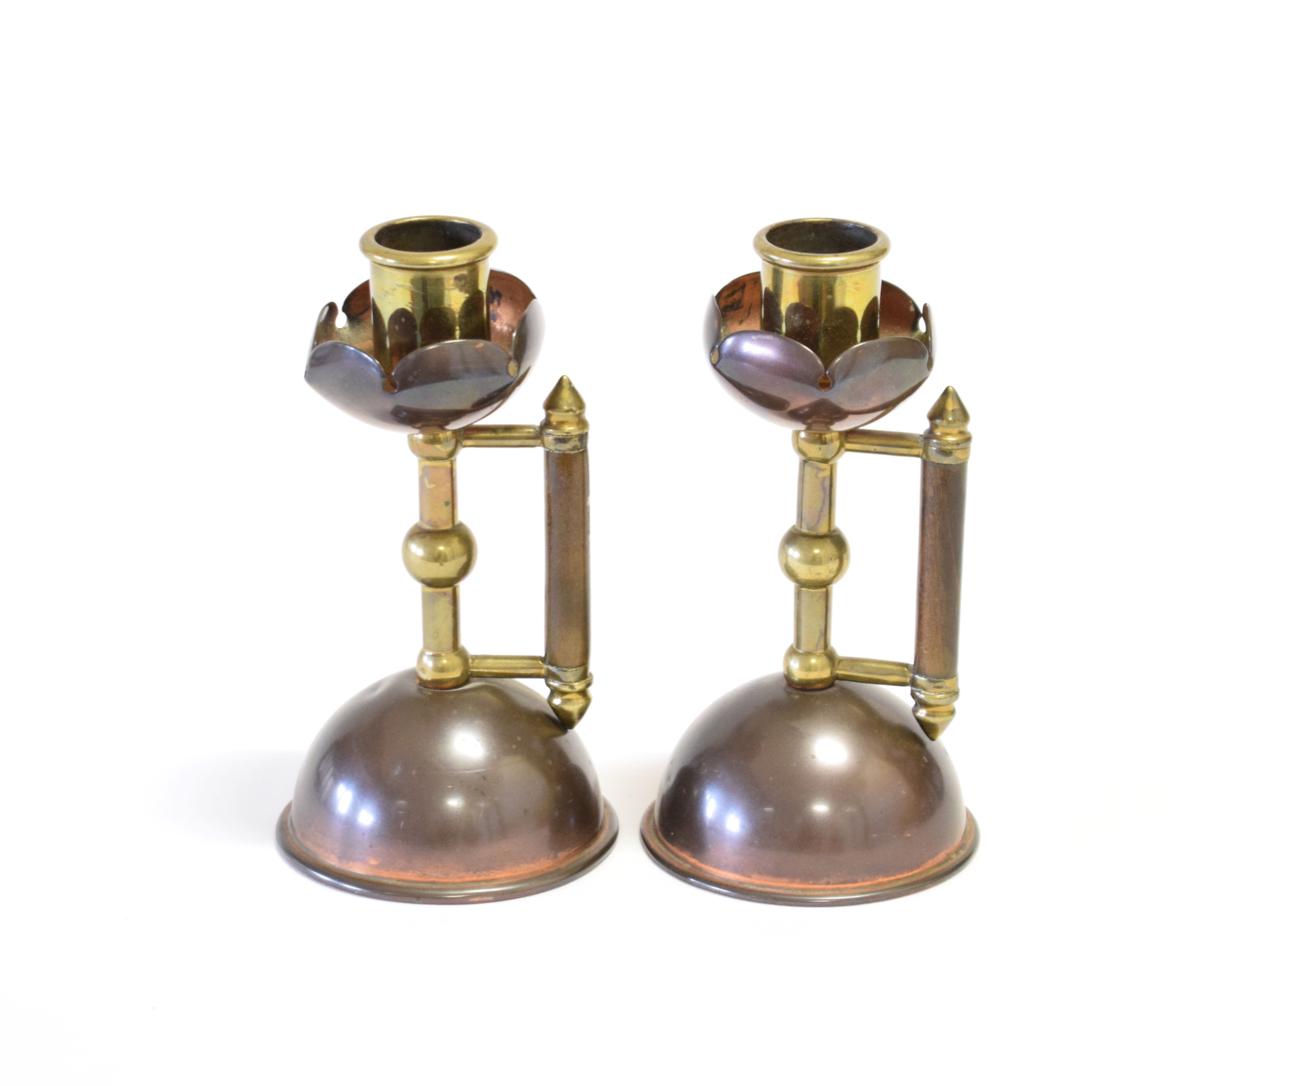 Lot 3564 - A Pair of  Benham & Froud Copper and Brass Candlesticks, attributed to Christopher Dresser, stained